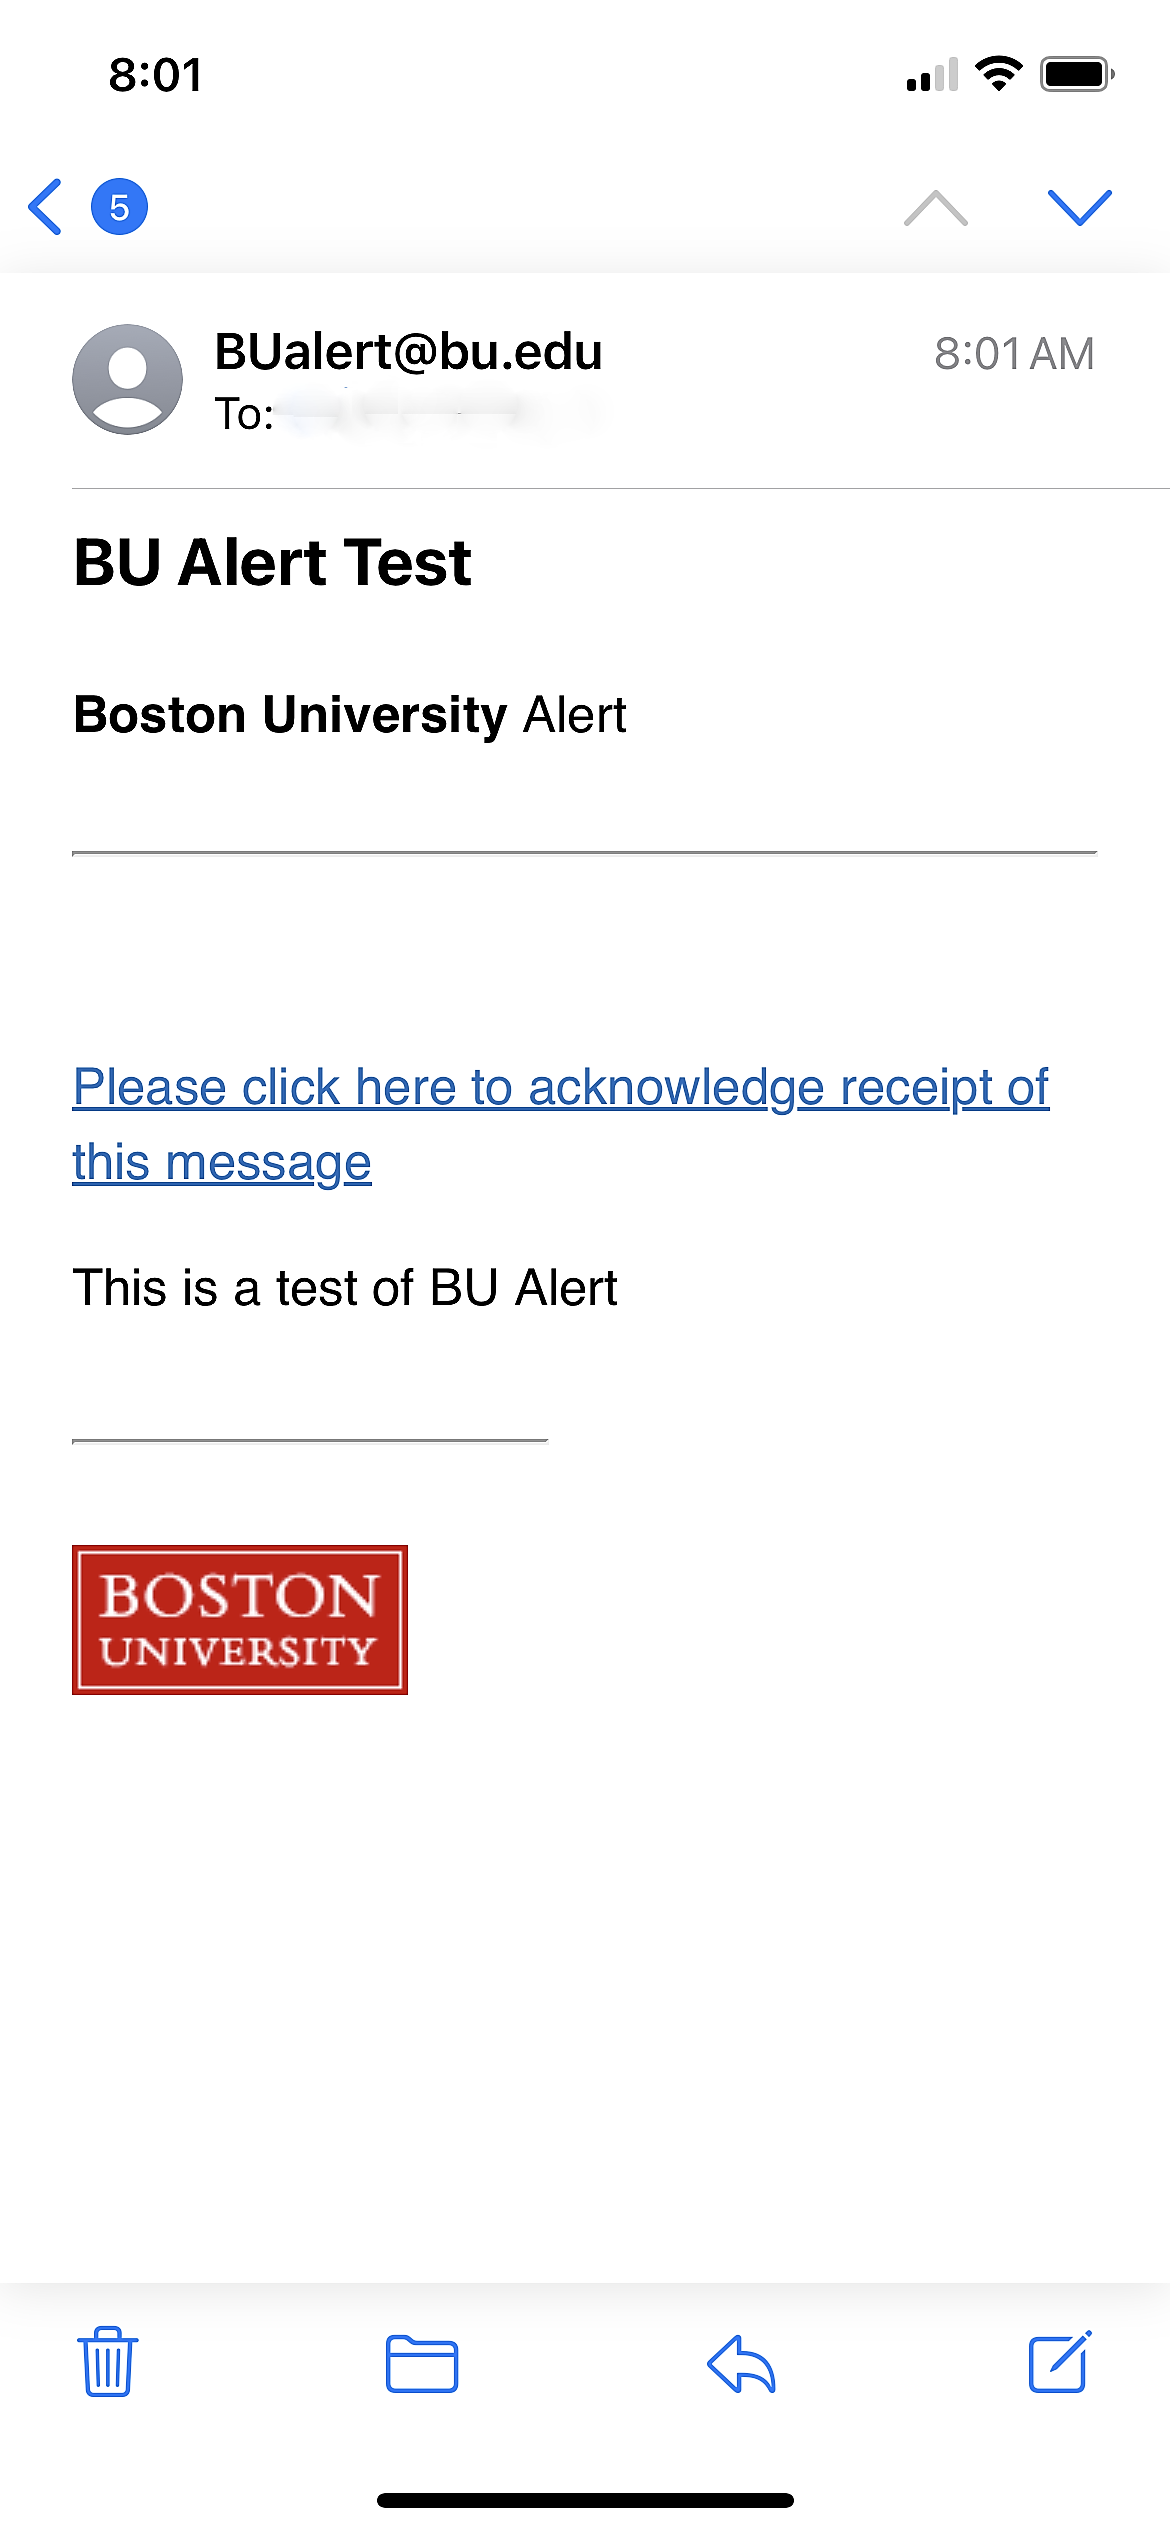 Screenshot: A sample of the email members of the BU community will receive Friday, September 15, at 4 pm alerting them of the test of the BU Alert system. Email has a link that reads "Please click here to acknowledge receipt of the message. Test of BU Alert".